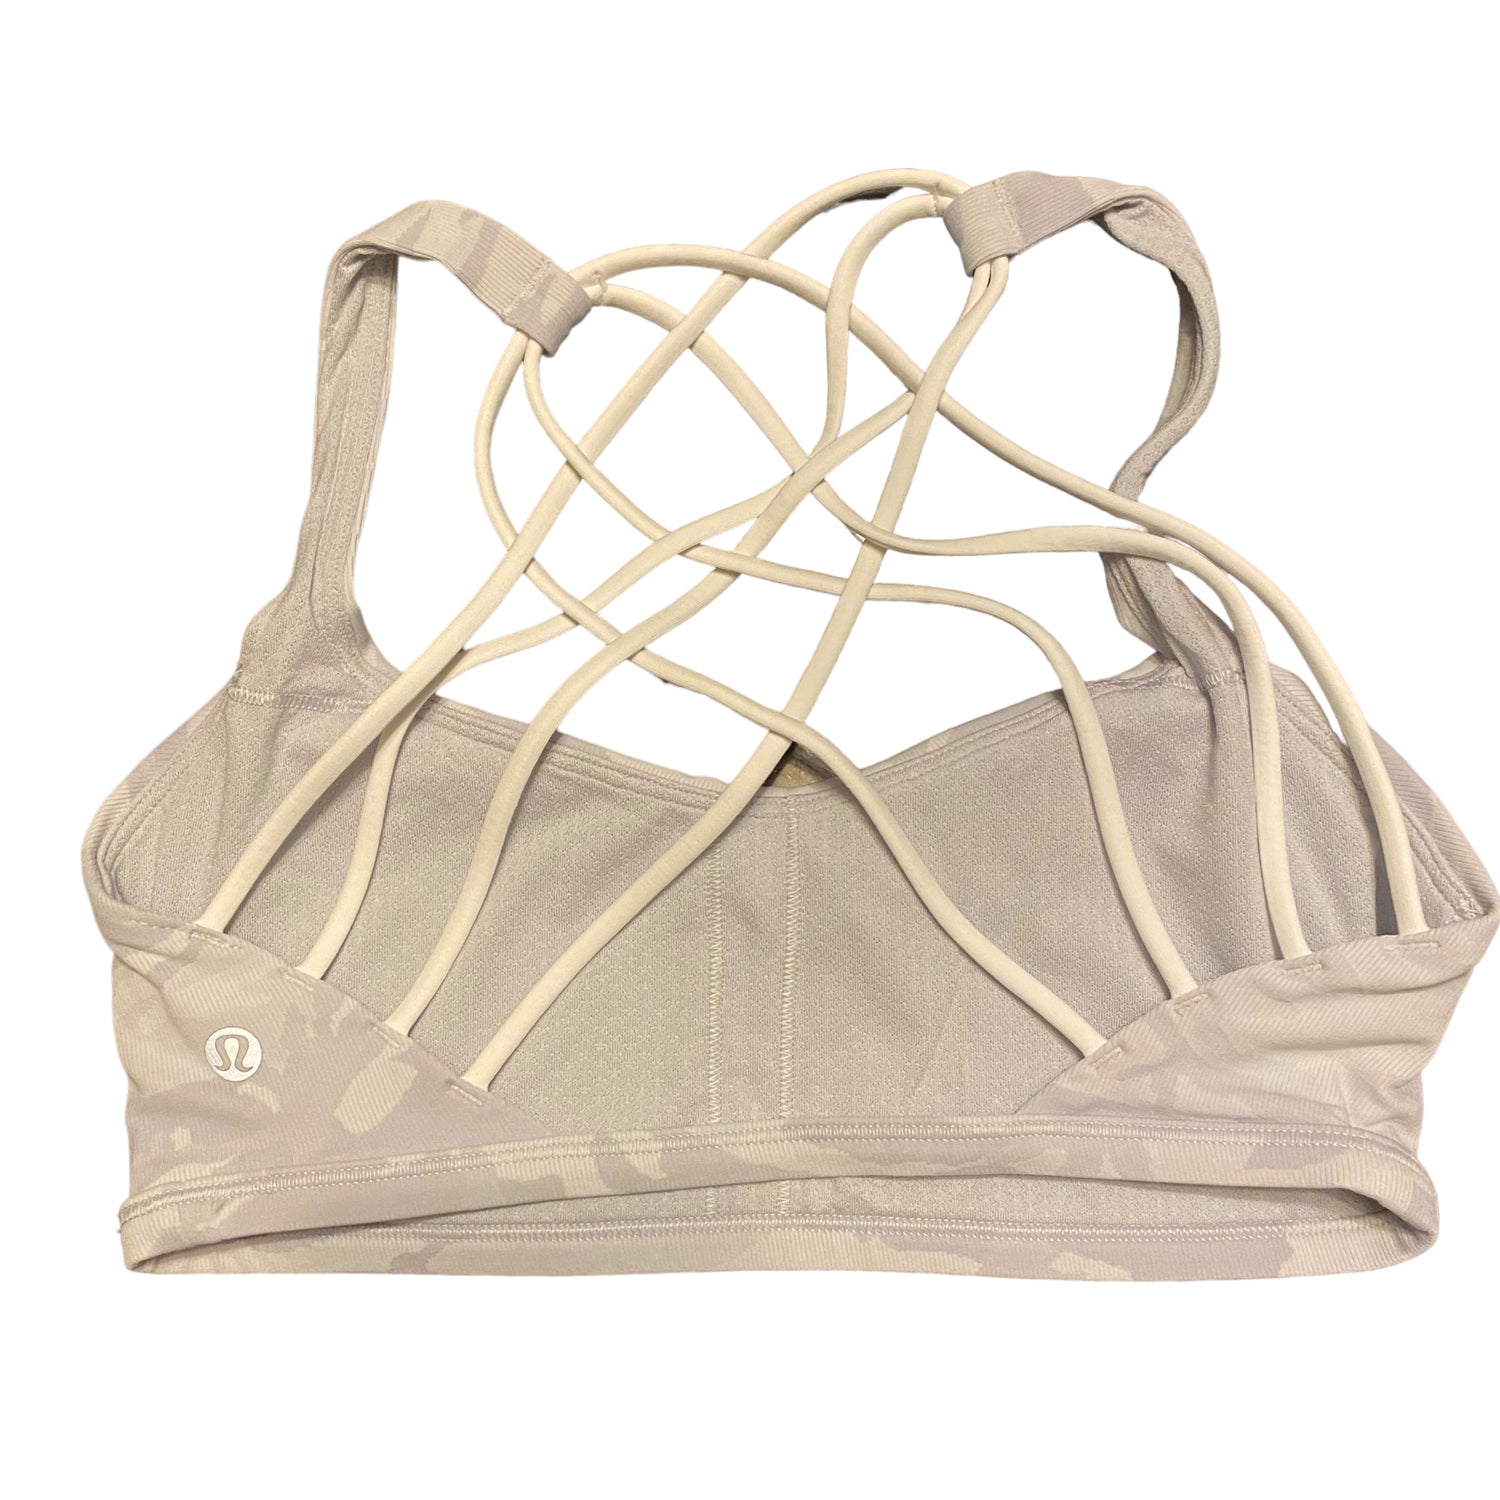 Lululemon Free to Be Bra Size 6 - Love it again boutique